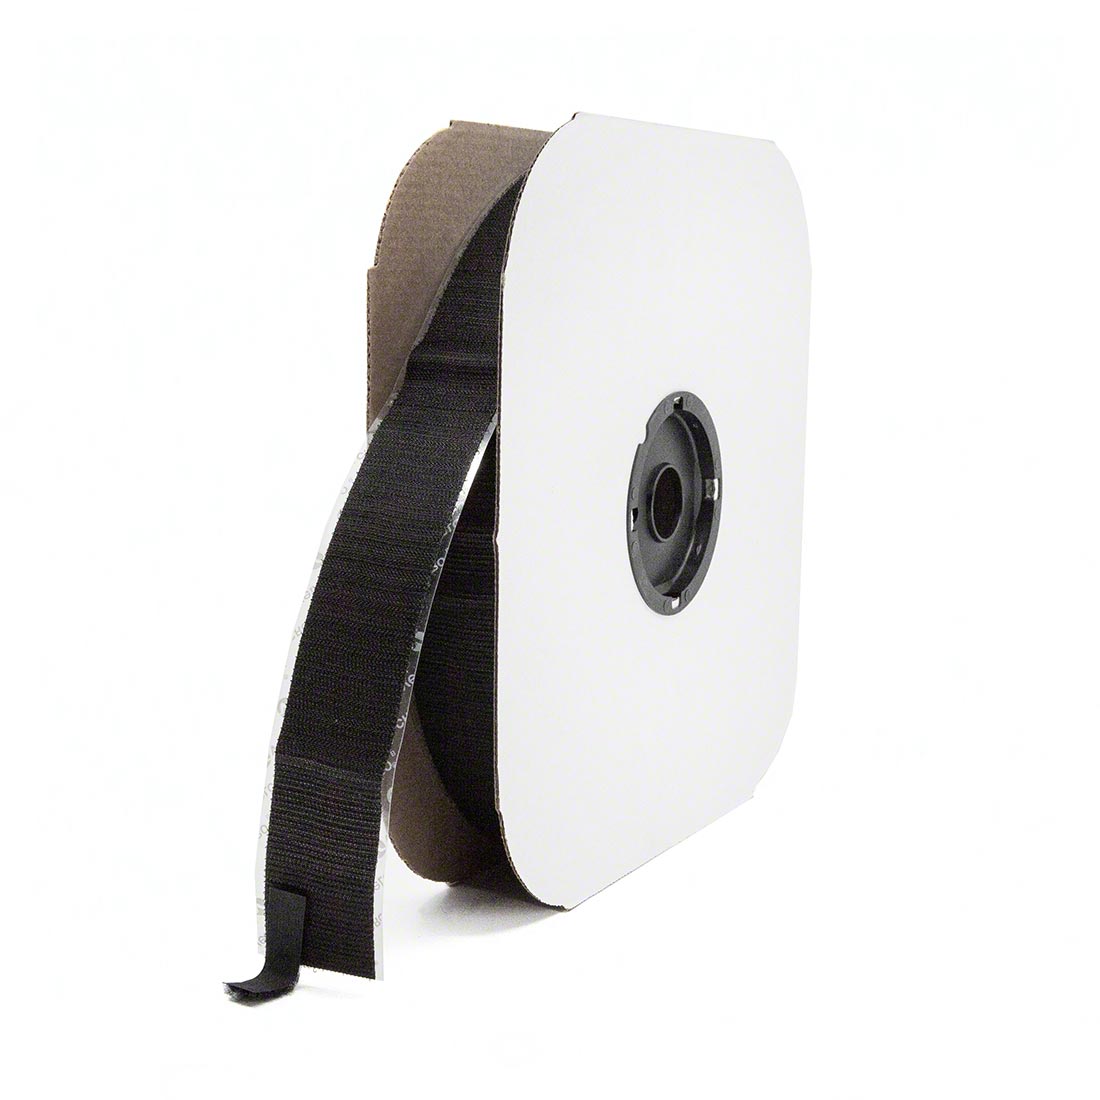 Sturdy Velcro tape Double-sided adhesive Stick-on attachment